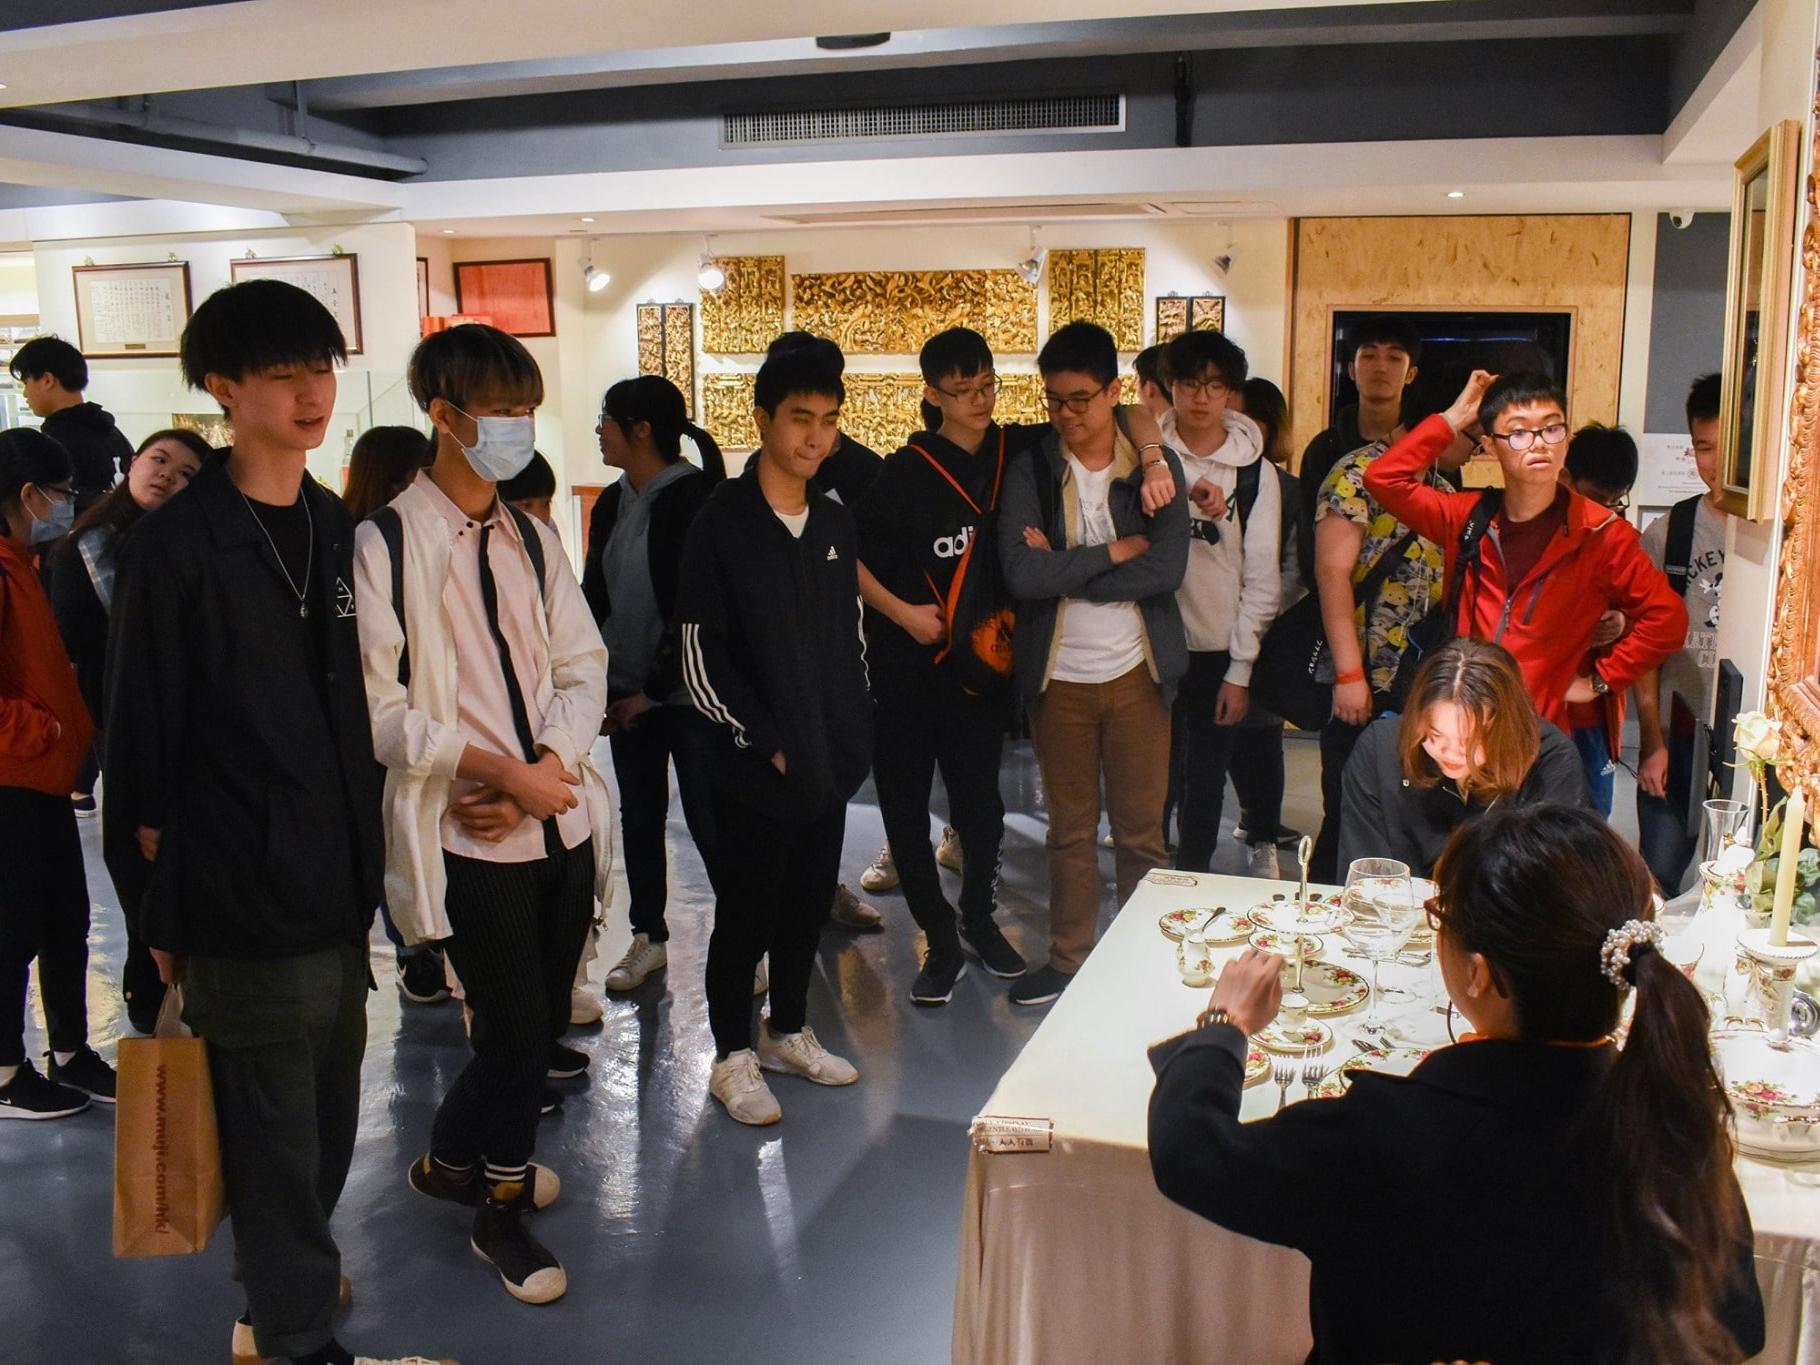 Business students visited Tao Heung Museum of Food Culture.